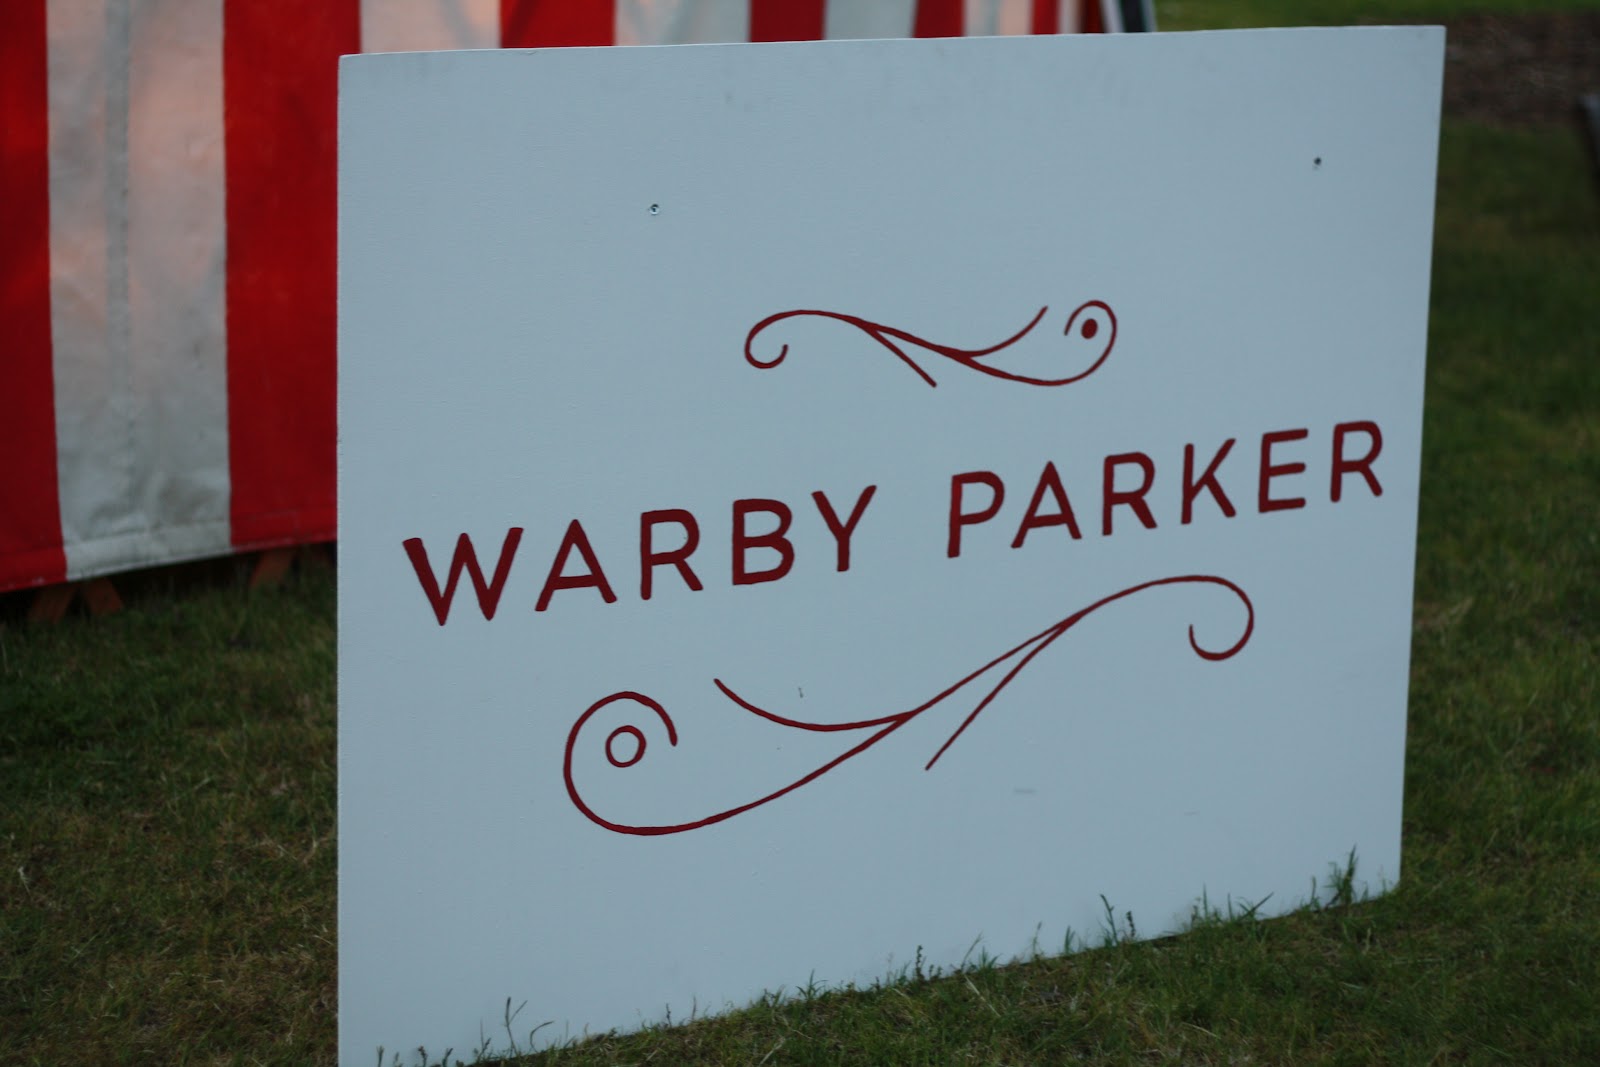 Warby Parker’s Citizen’s Circus at SXSW